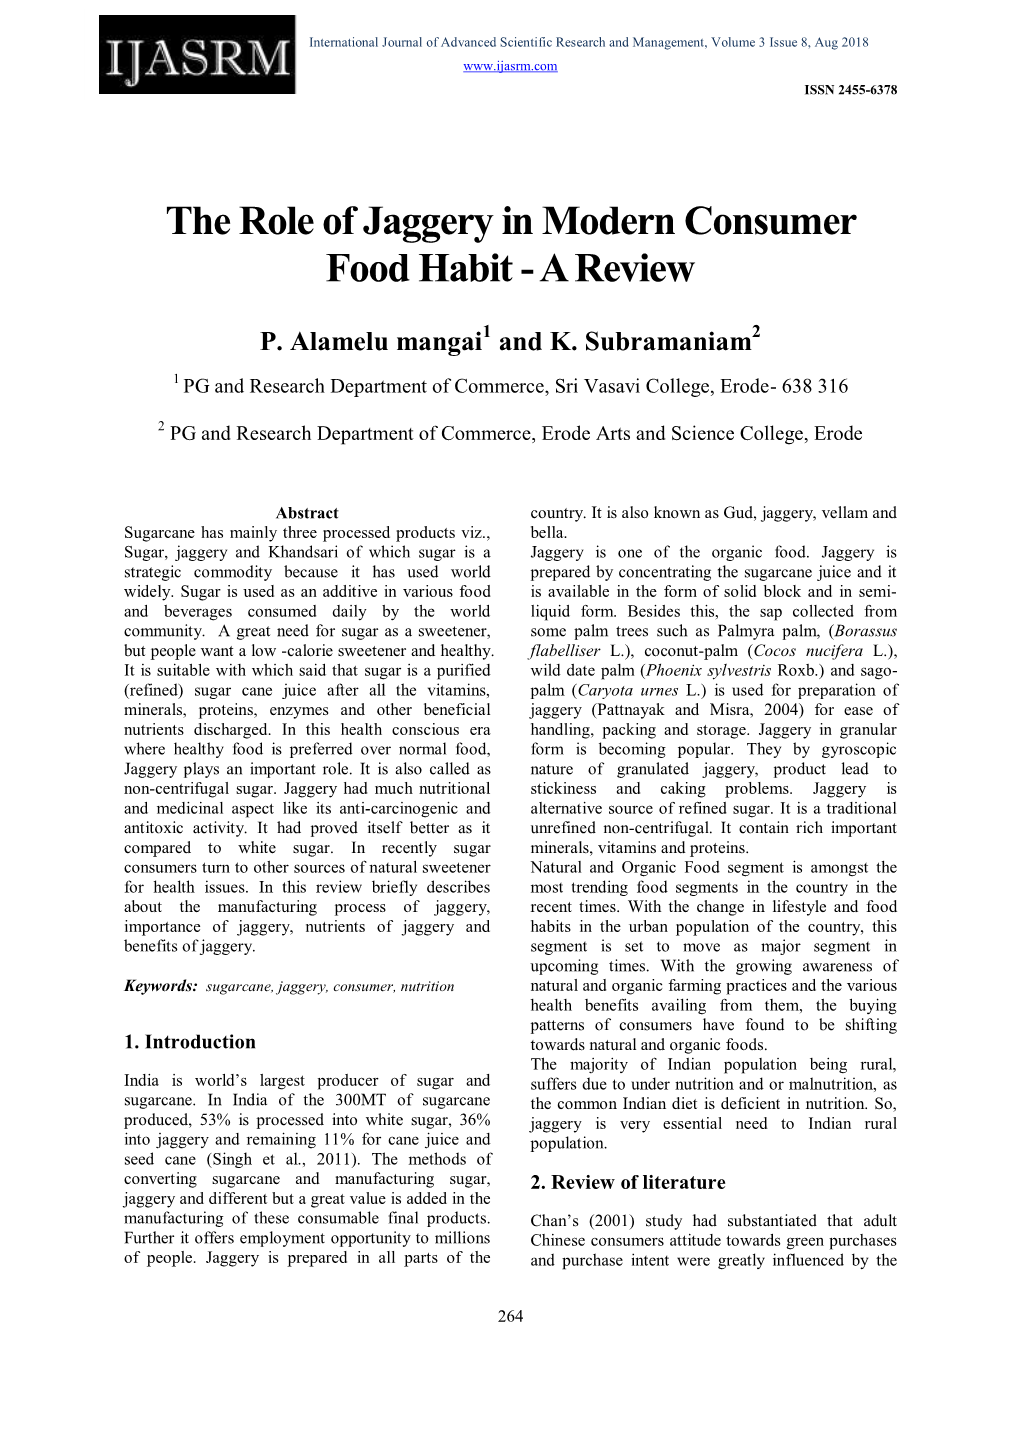 The Role of Jaggery in Modern Consumer Food Habit - a Review